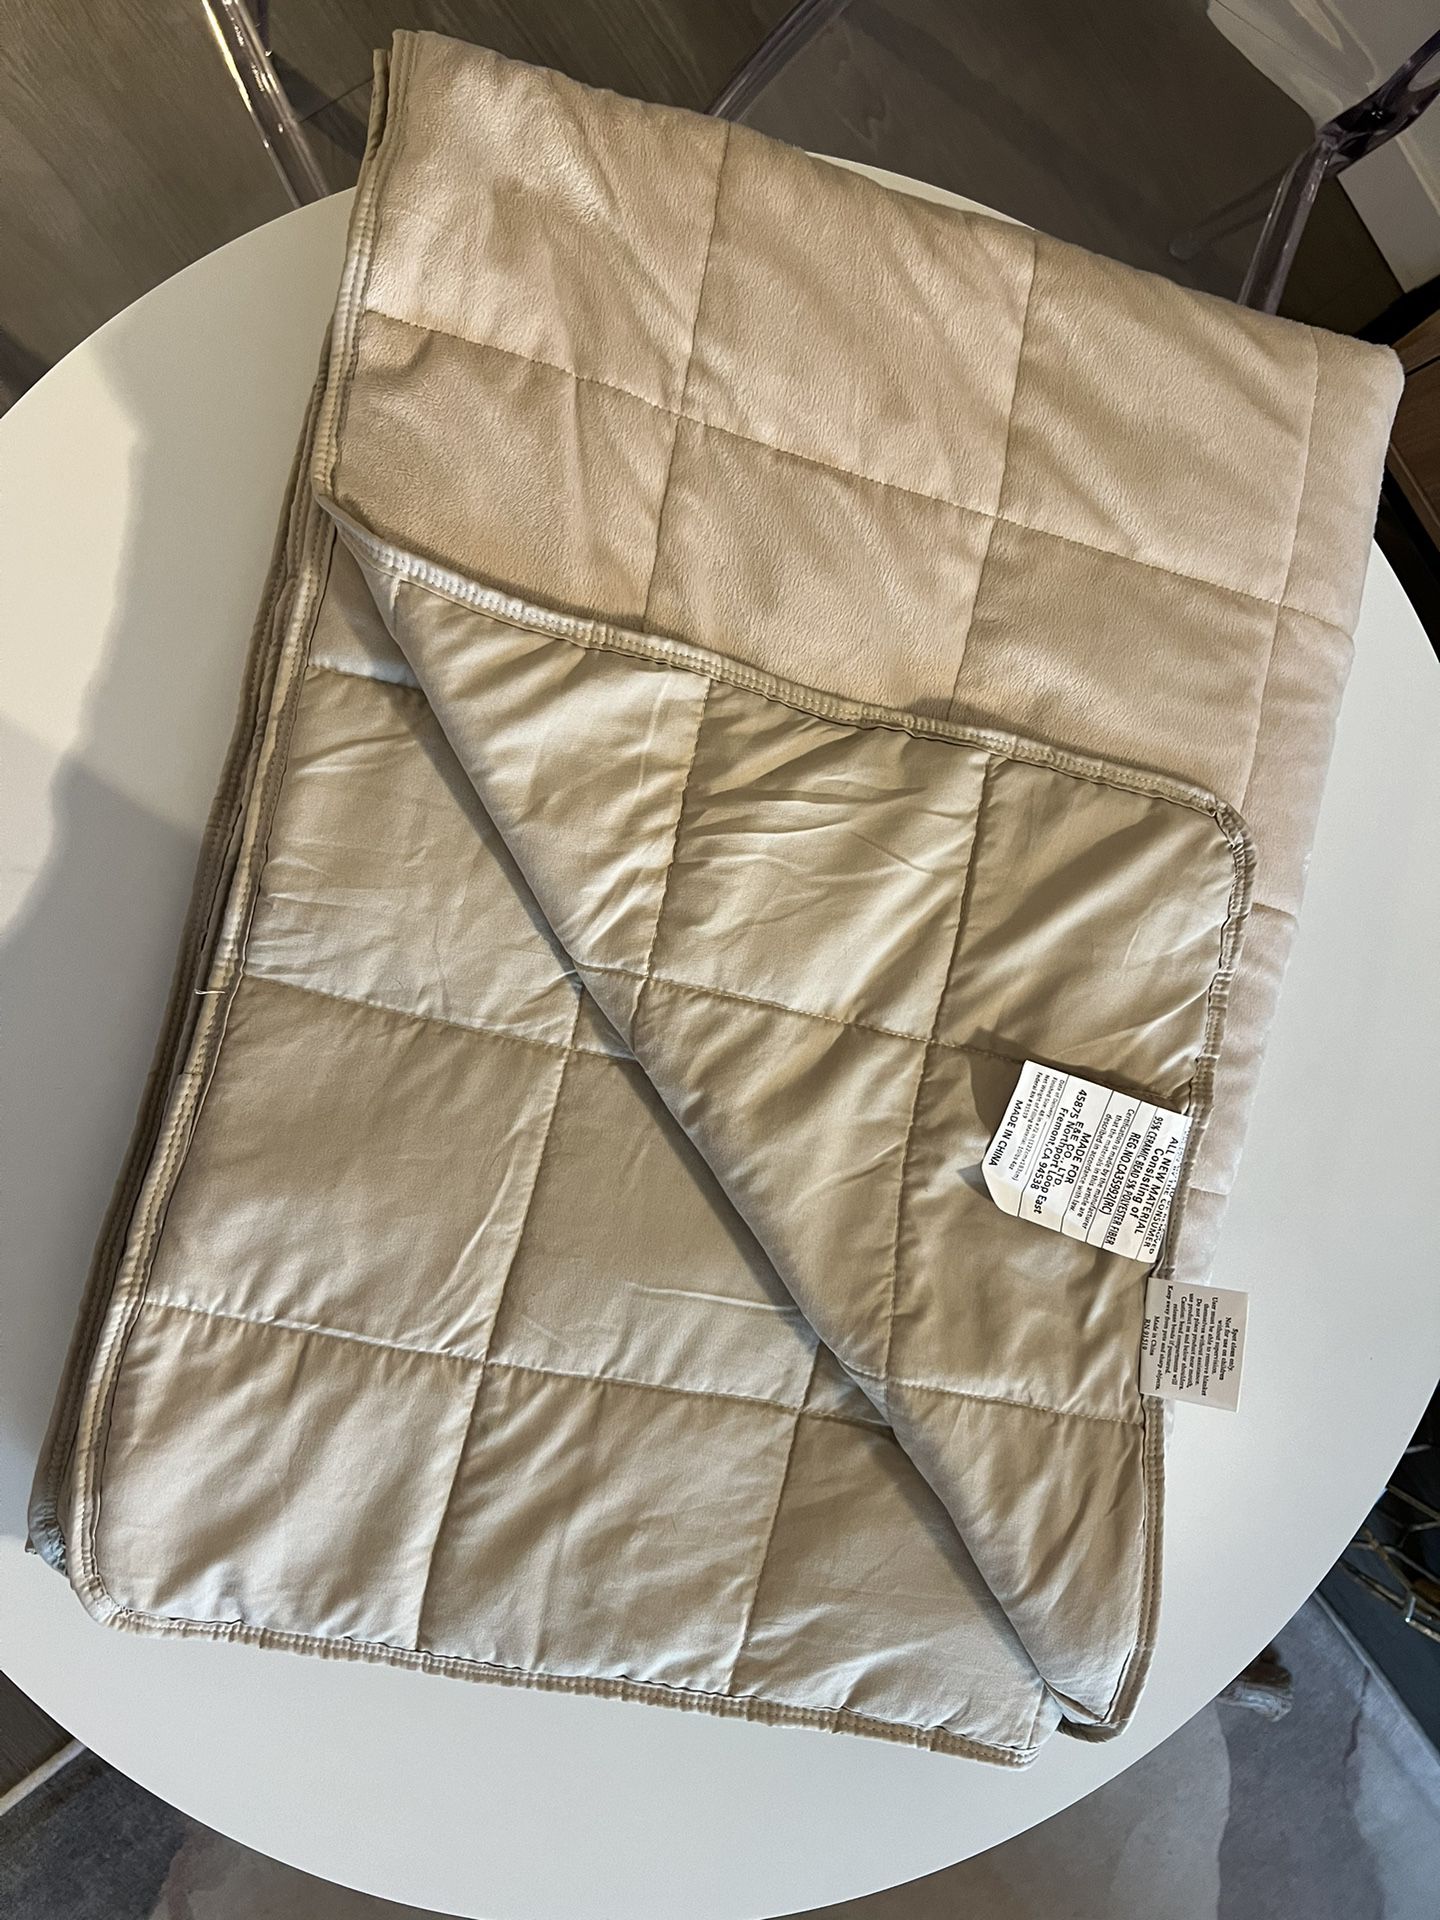 Sleep Philosophy 10 lb weighted blanket - only used once and in brand new condition!